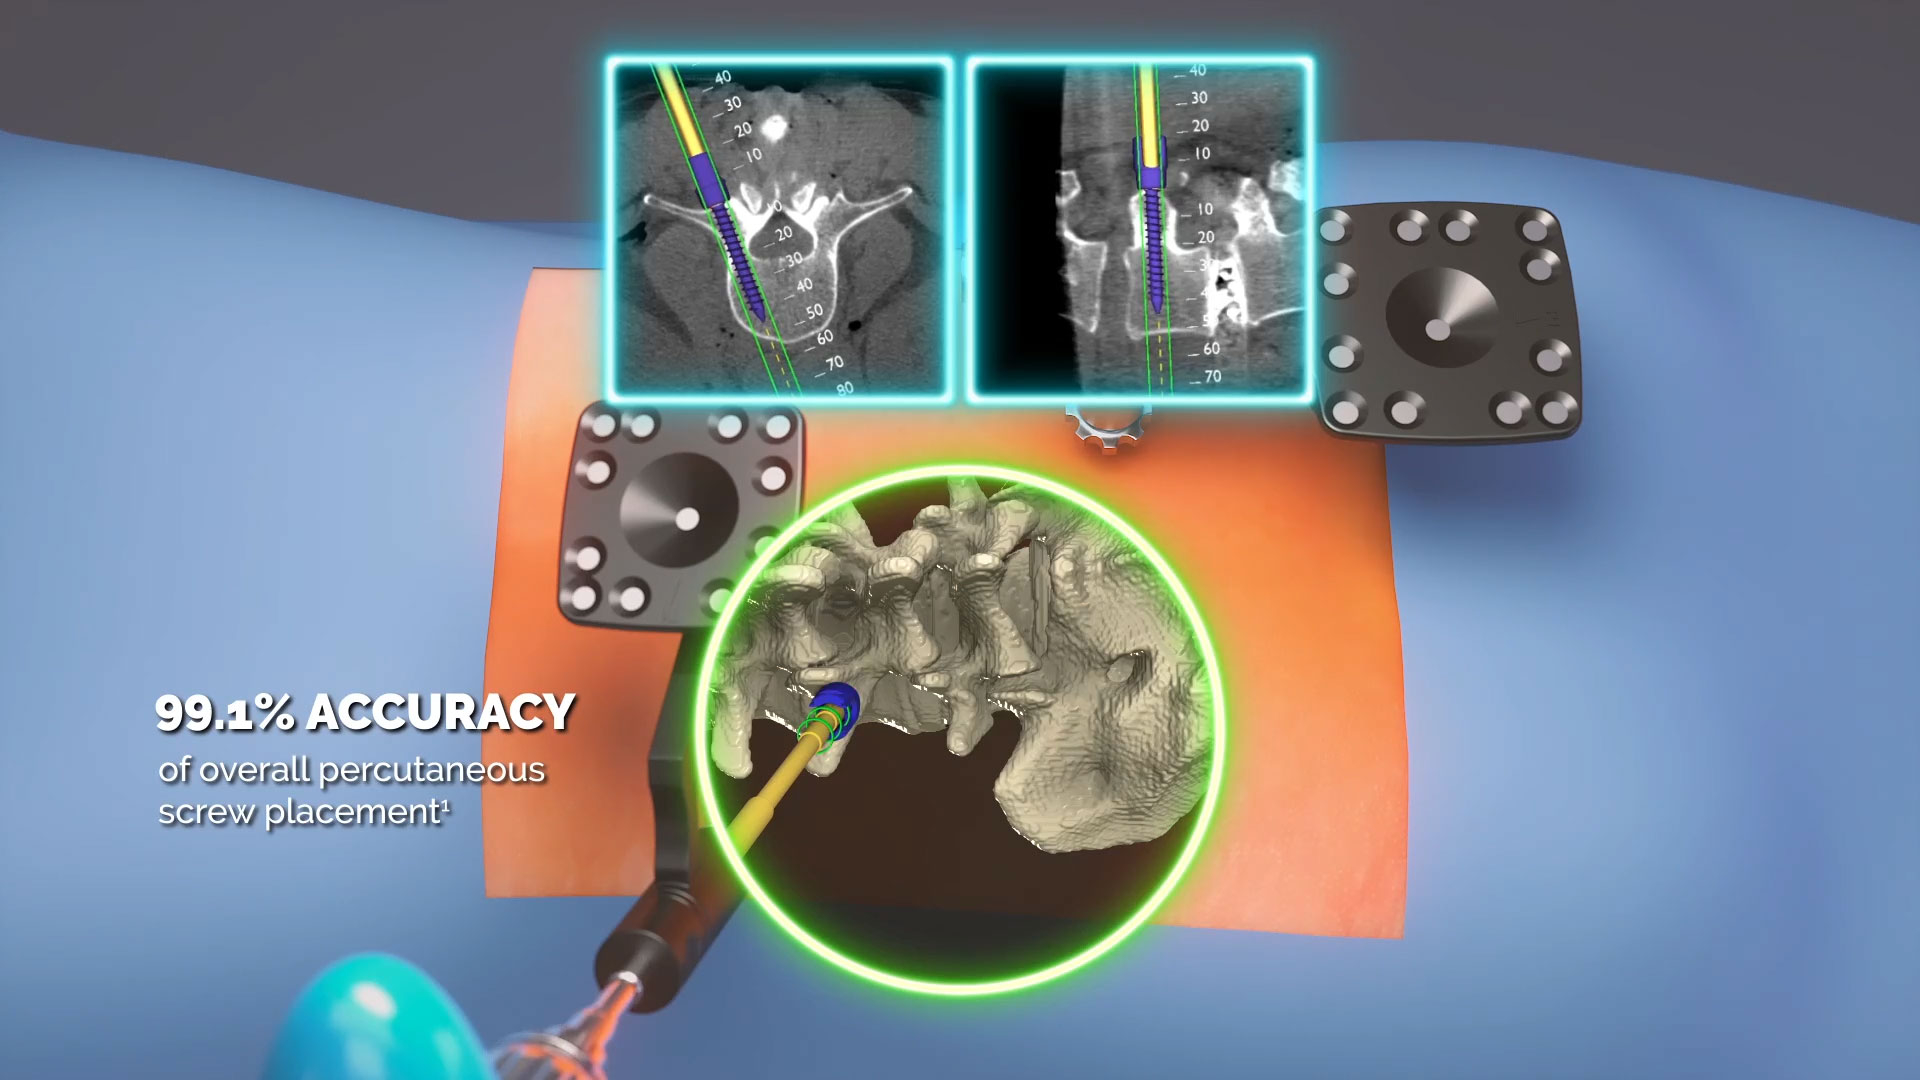 Watch: xvision gives surgeons the power to see patients' anatomy as if they have "x-ray vision,” and accurately navigate instruments and implants during spine surgery. Video: Augmedics